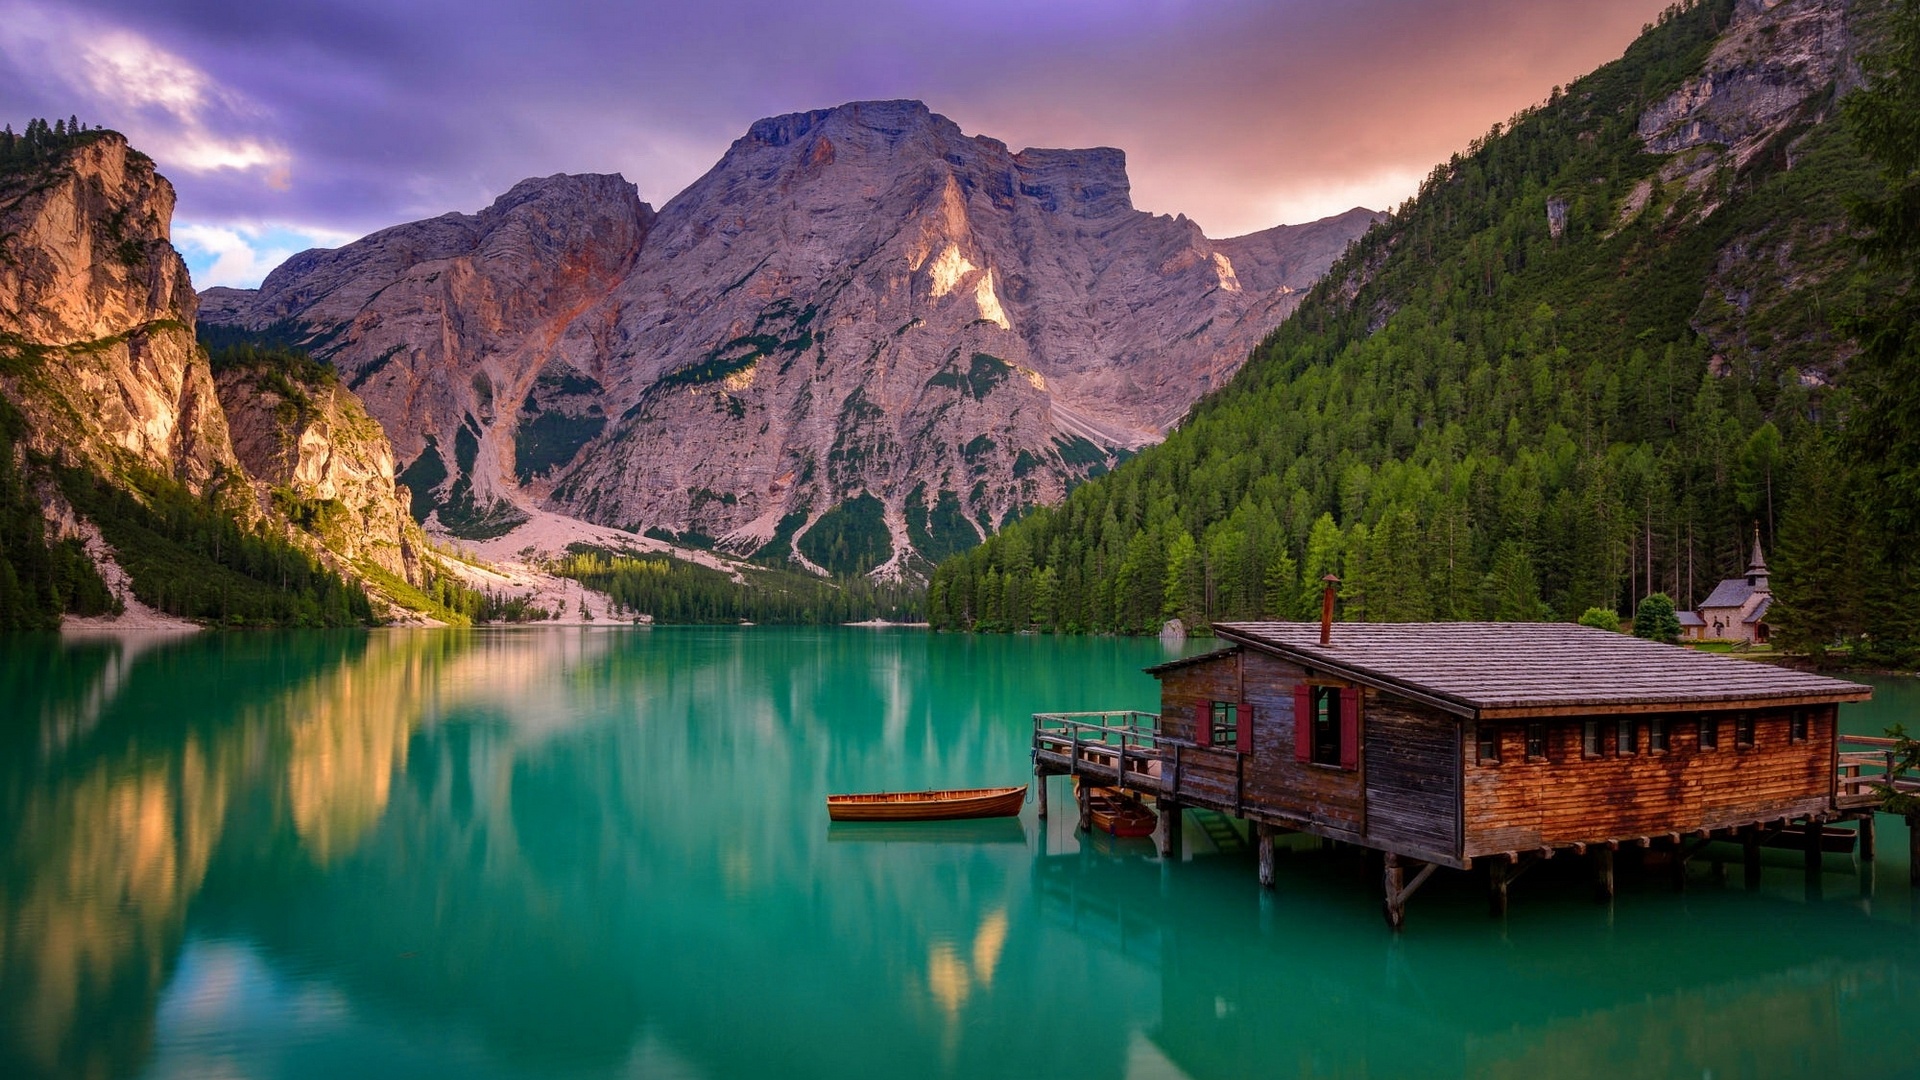 Mountain lake, Dolomites scenery, Italy landscapes, Stunning wallpapers, 1920x1080 Full HD Desktop